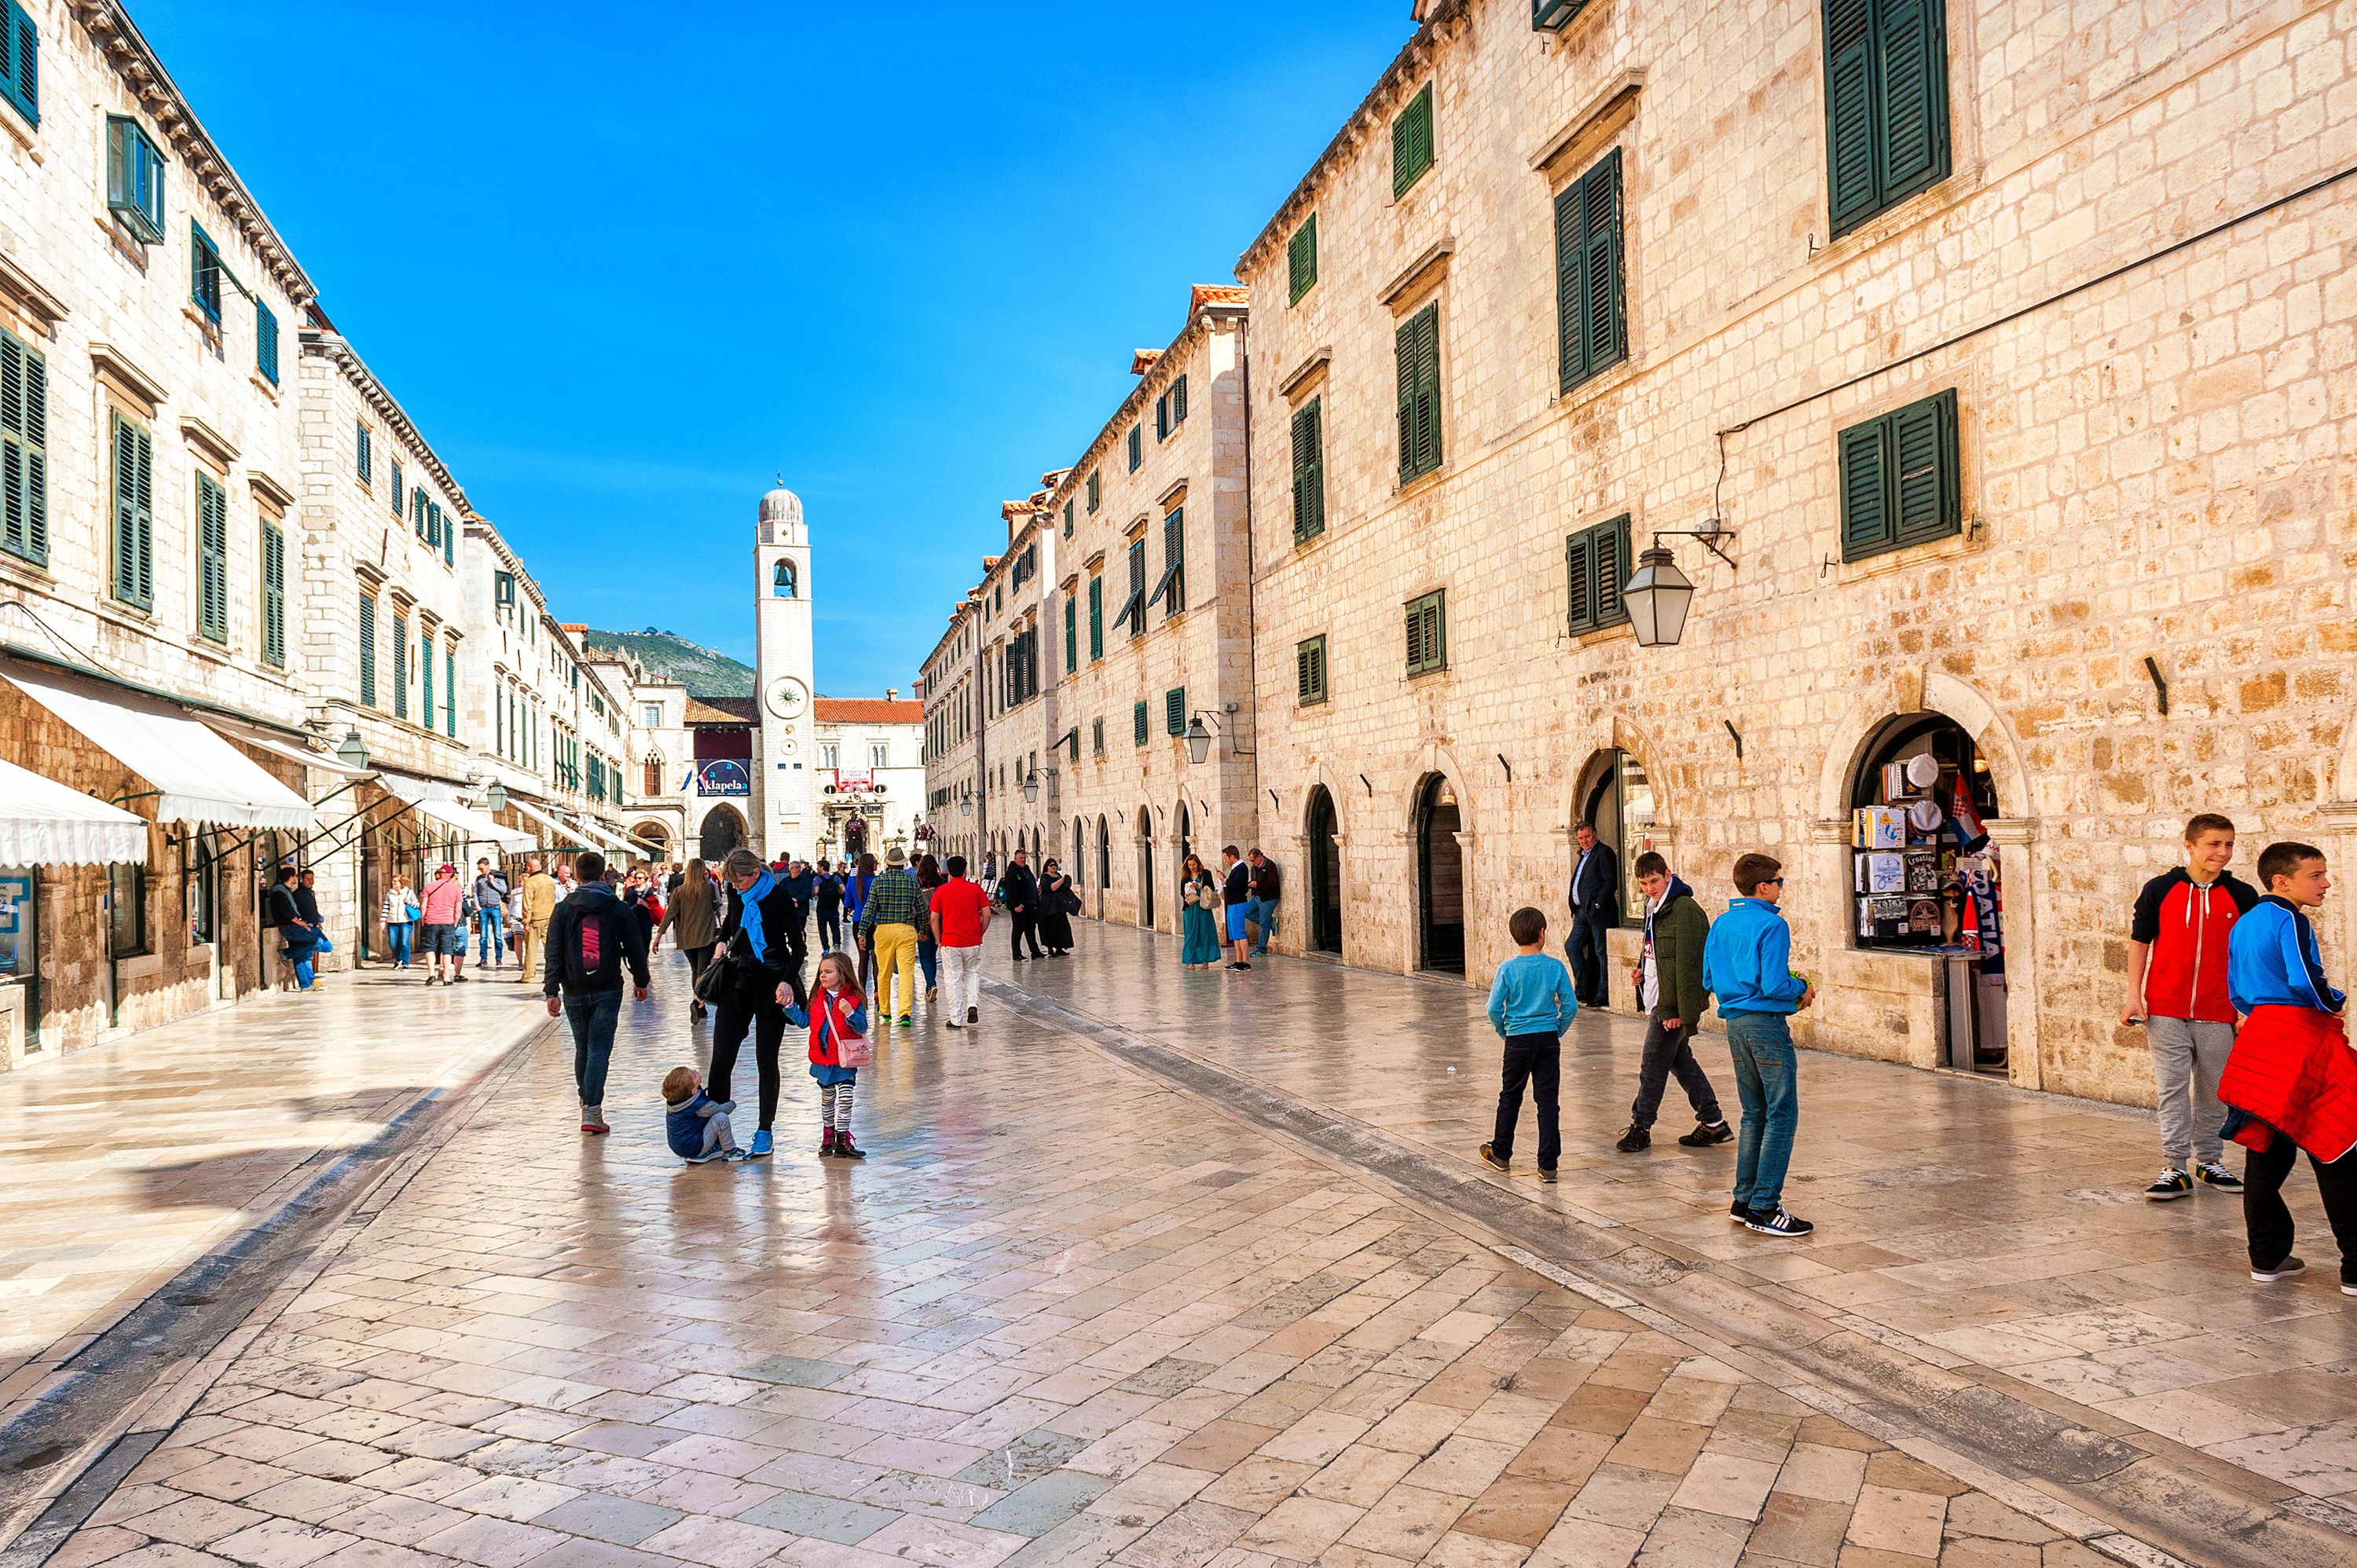 DUBROVNIK, CROATIA - APRIL 10: Many tourists visit the Old Town of Dubrovnik, a UNESCO's World Heritage Site on April 10, 2015.